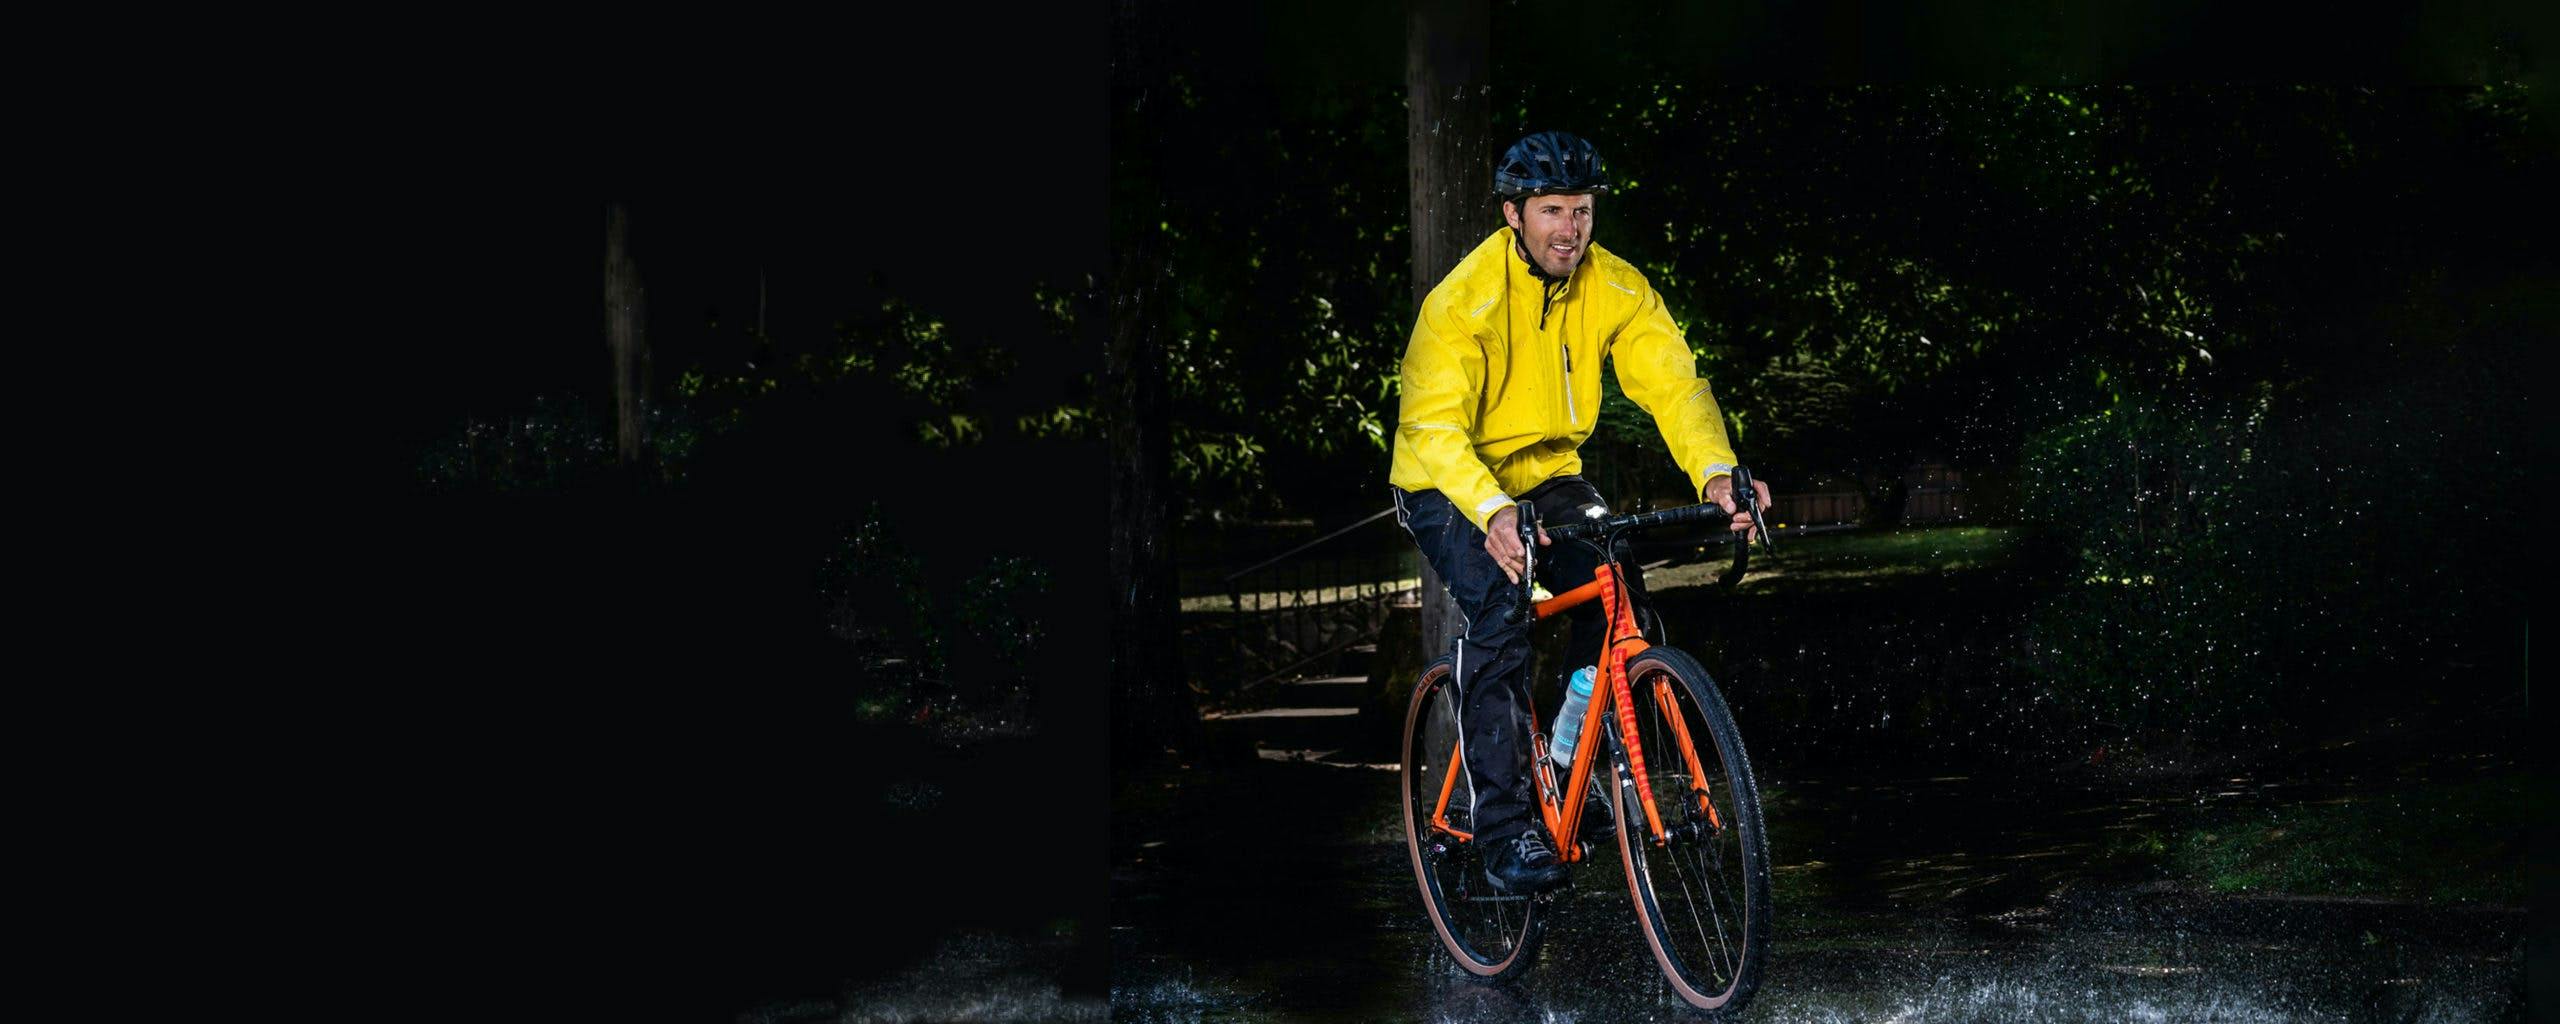 How to bike in the rain (and other fall bike commute tips)